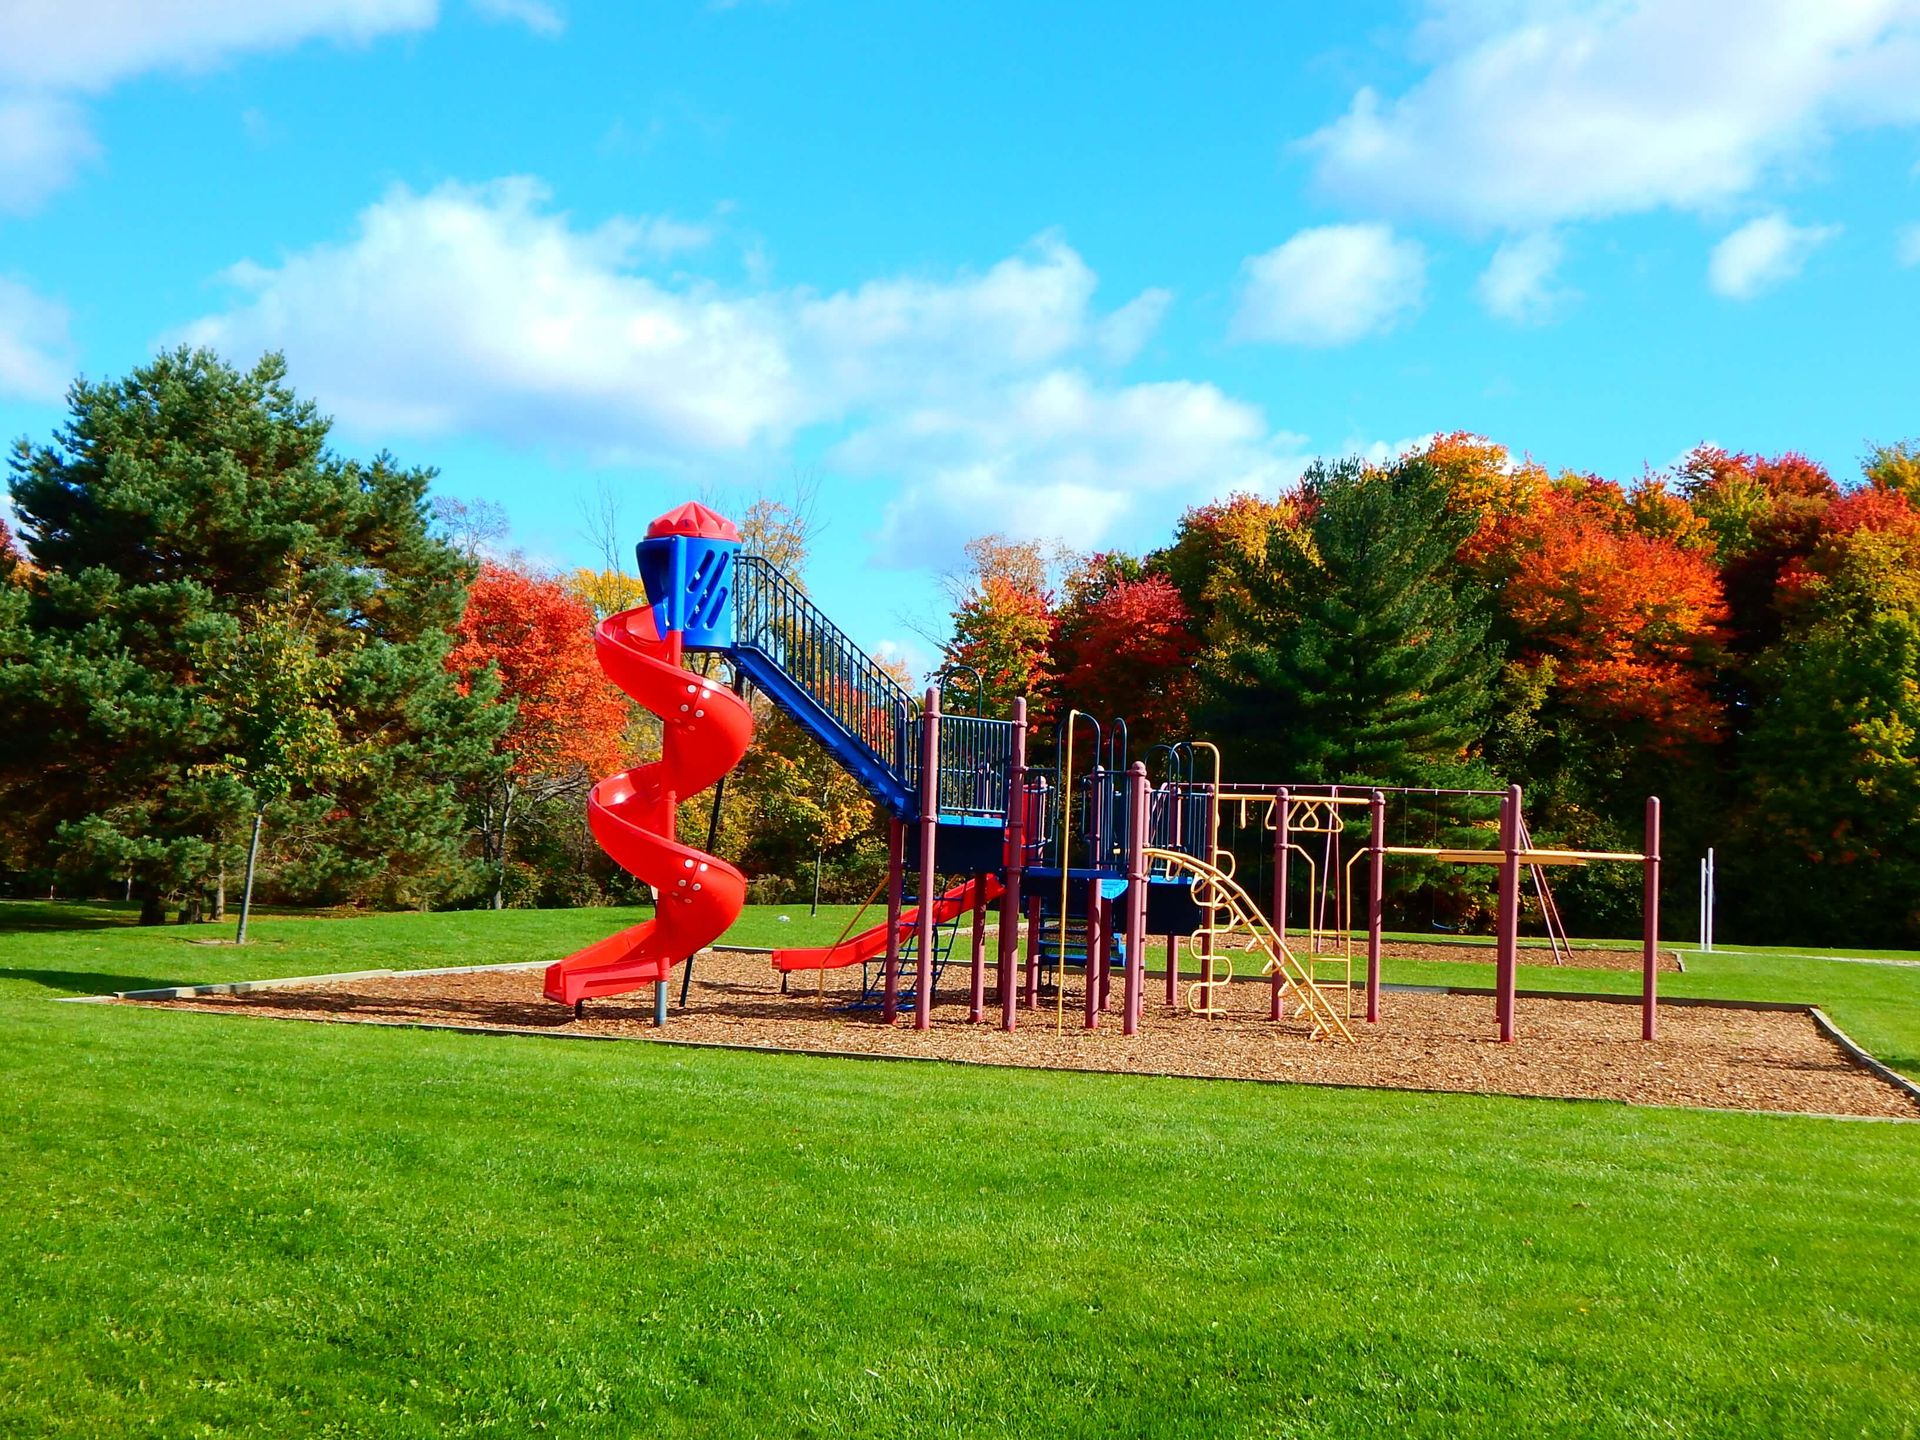 A playground with a red slide and a blue slide.